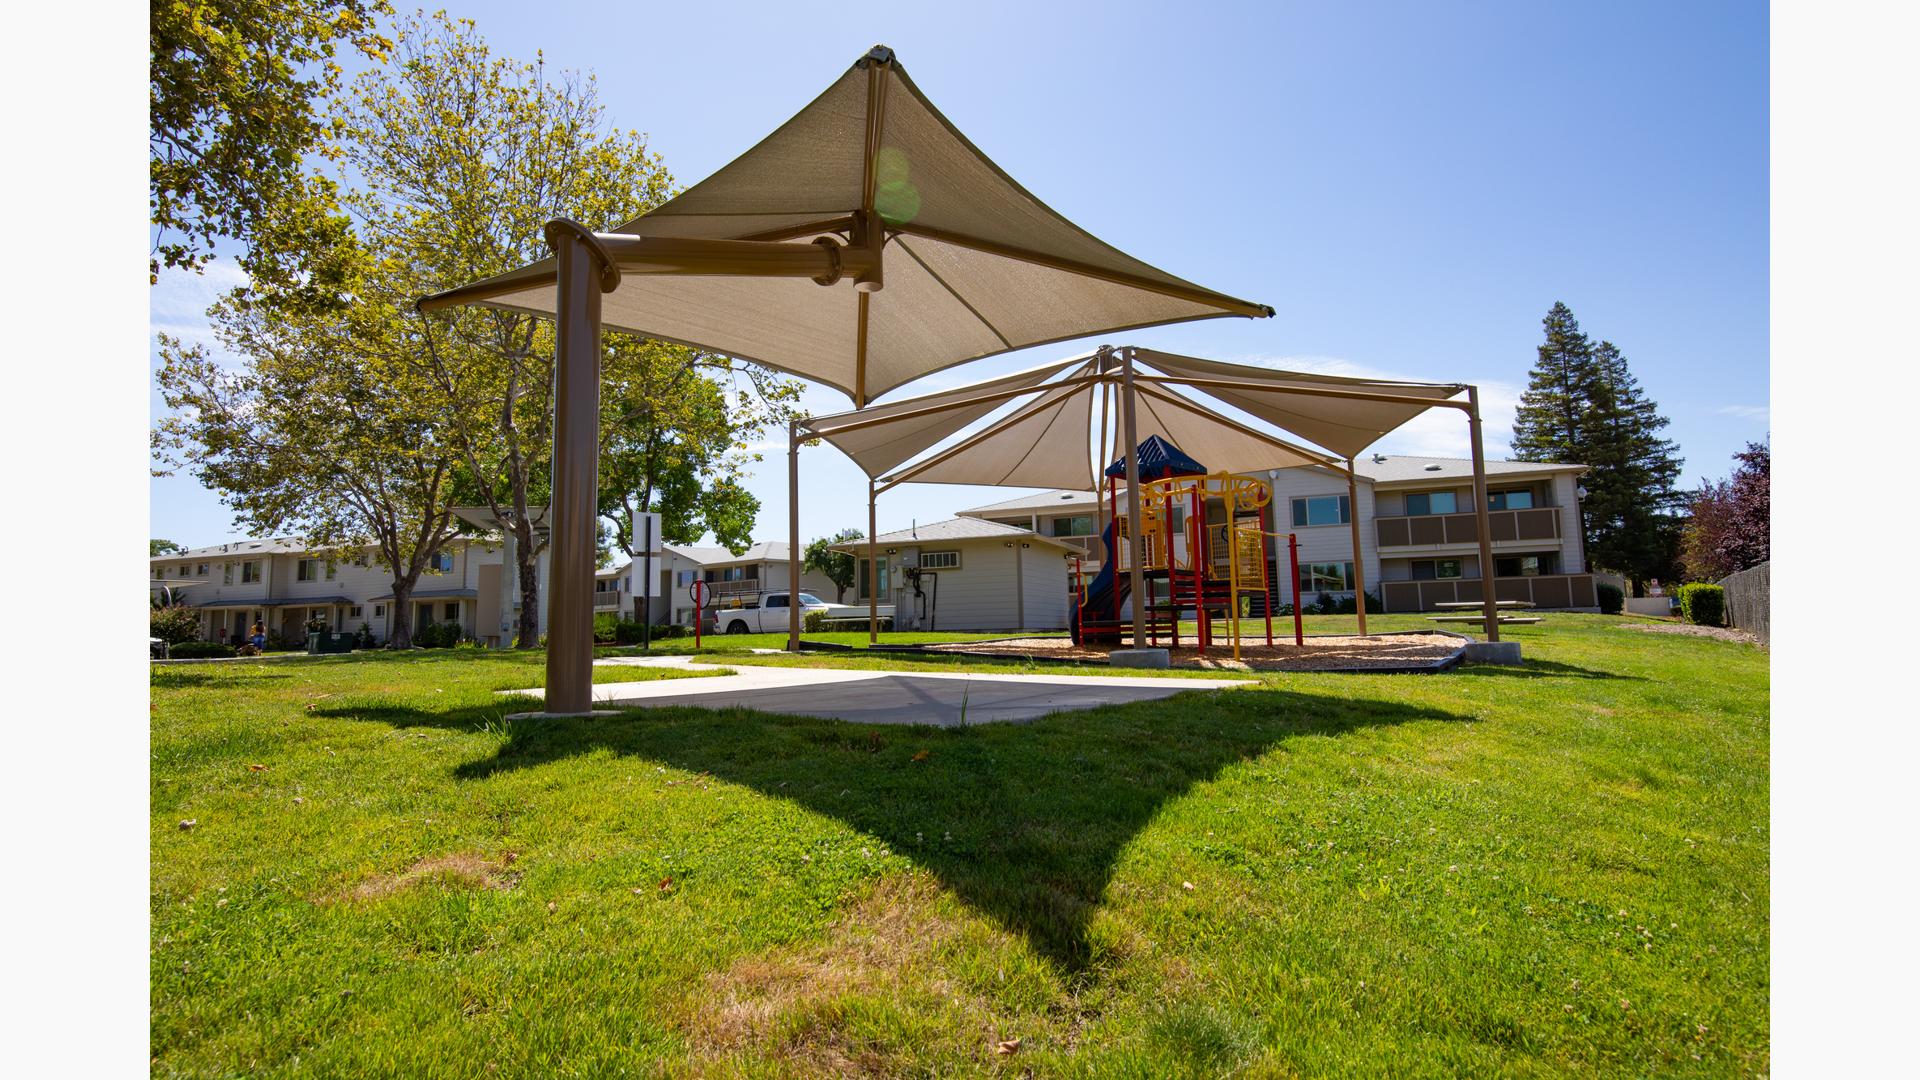 Parkview Apartments, Lincoln, CA. A PlaySense® play structure that includes playground slides, climbers, activity panels, overhead ladders, and SkyWays® shade canopies.